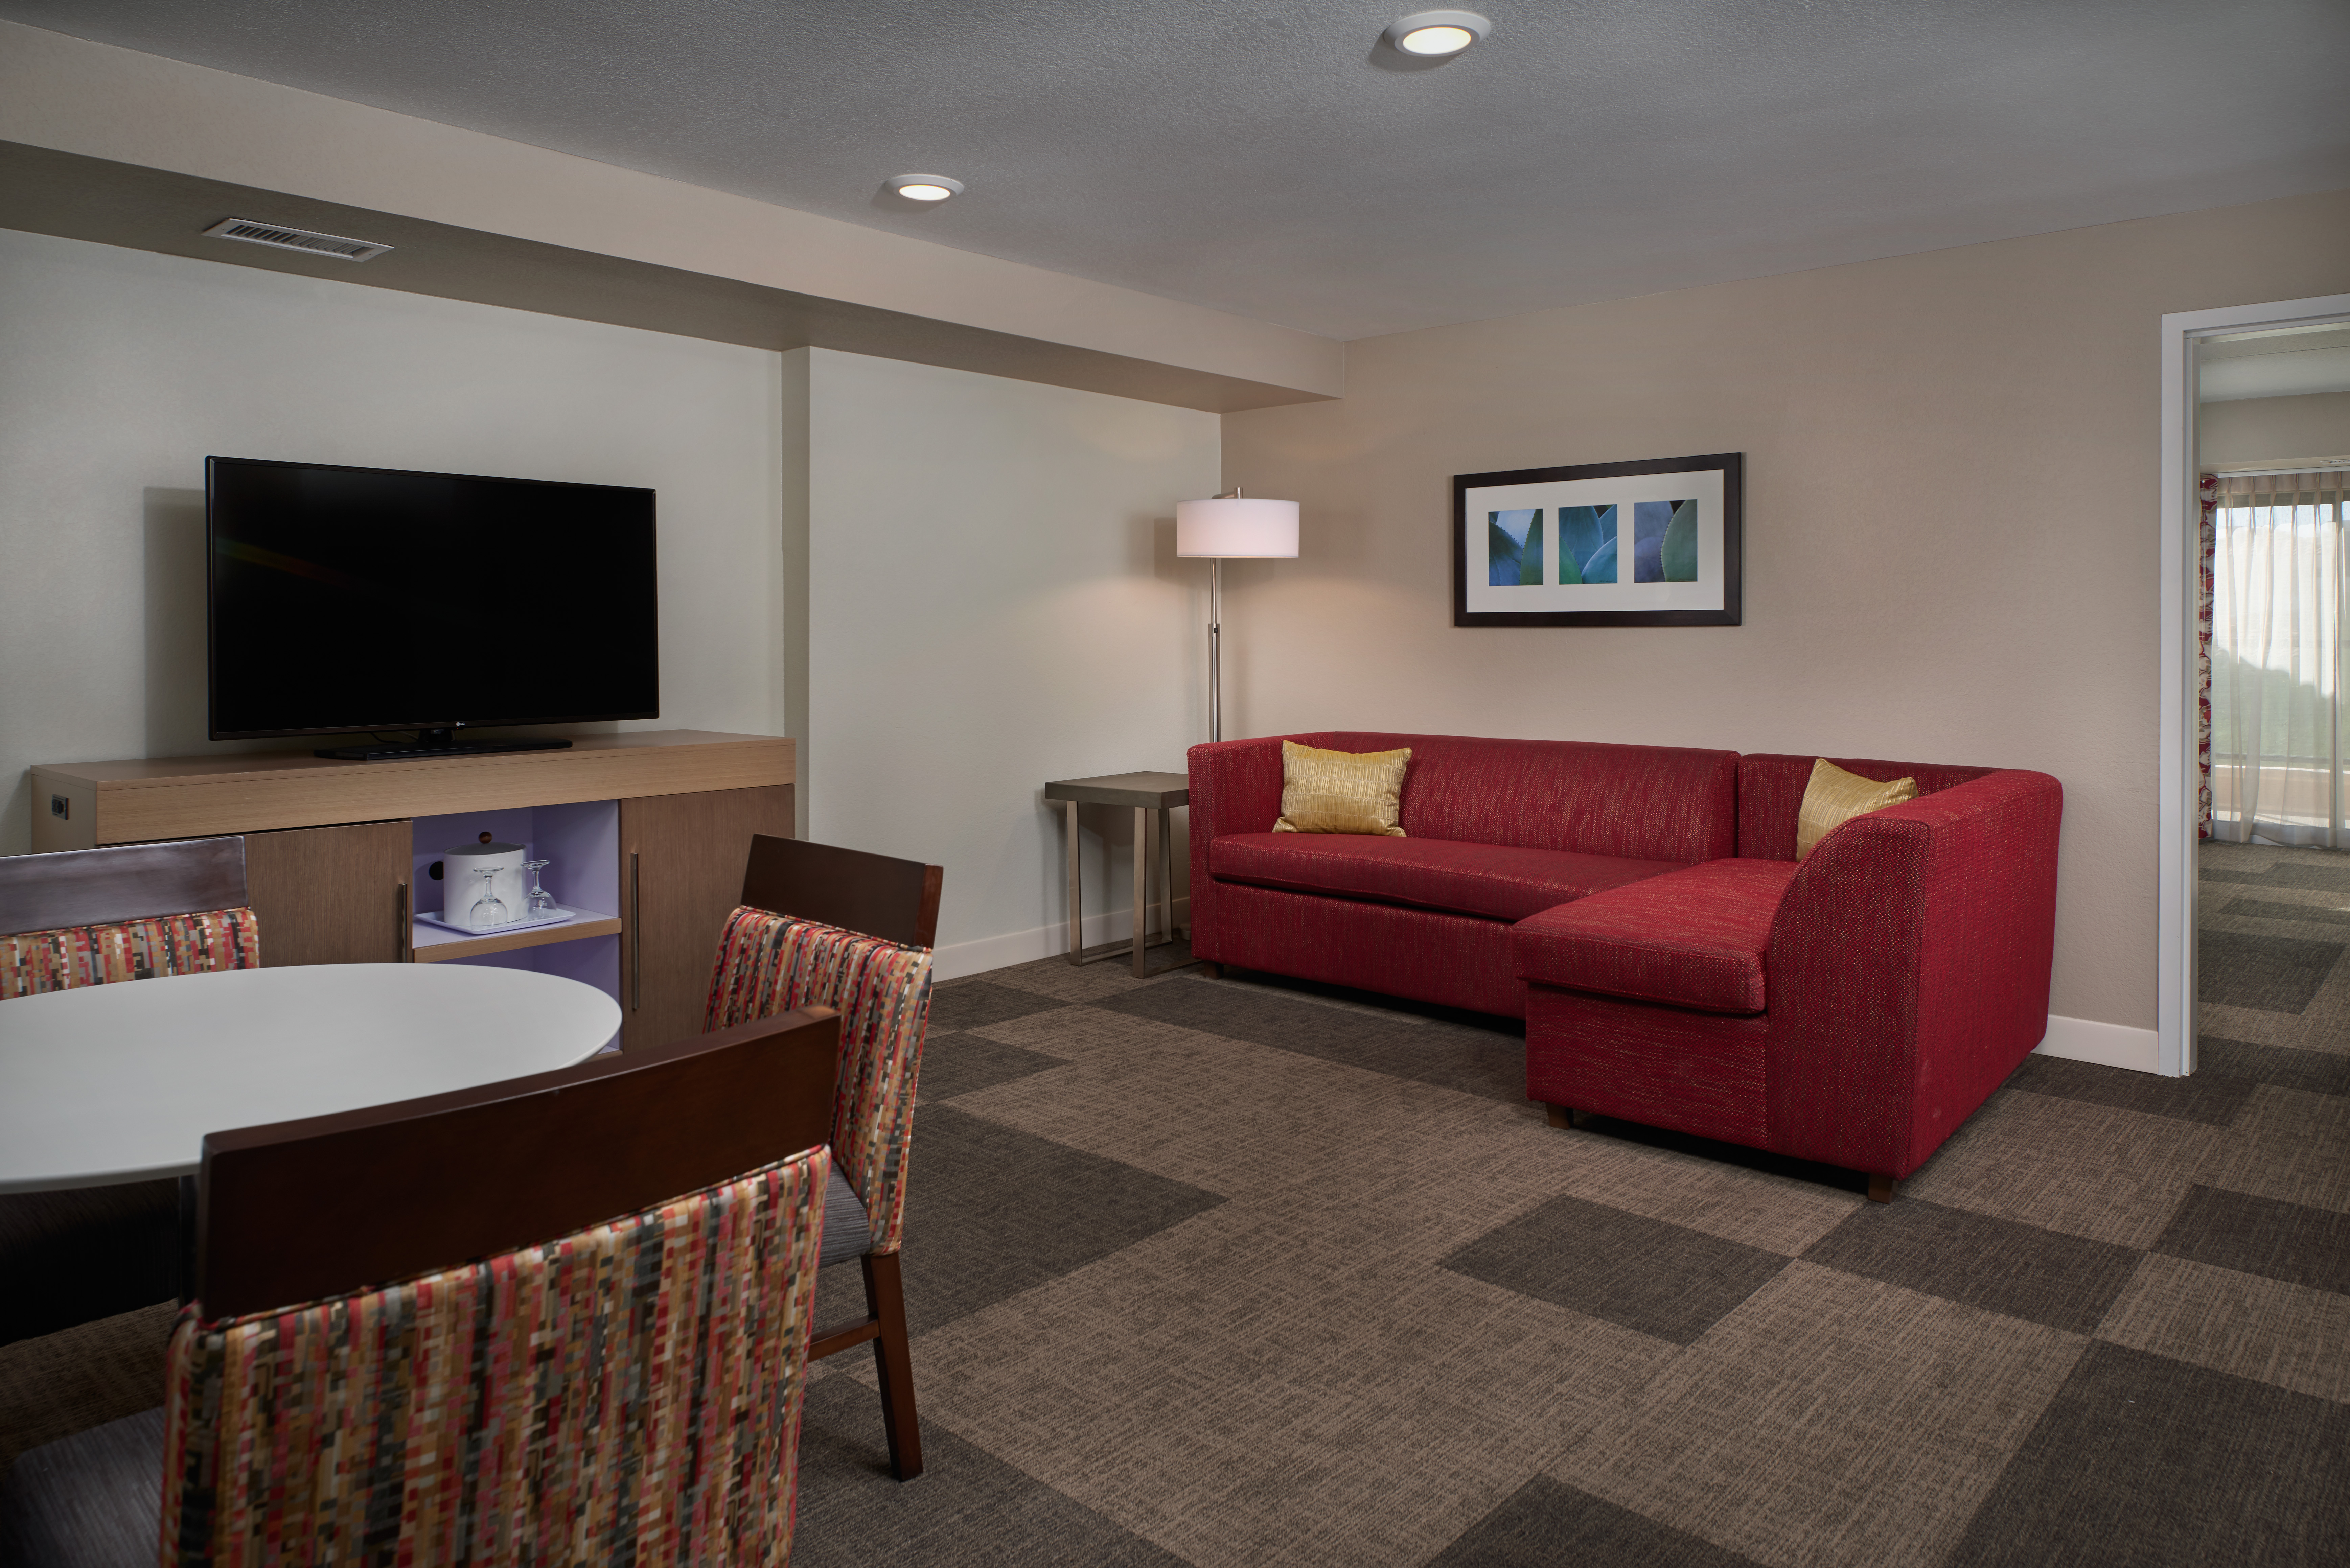 Guest Suite Lounge Area with Sofa, Chairs, Table and HDTV